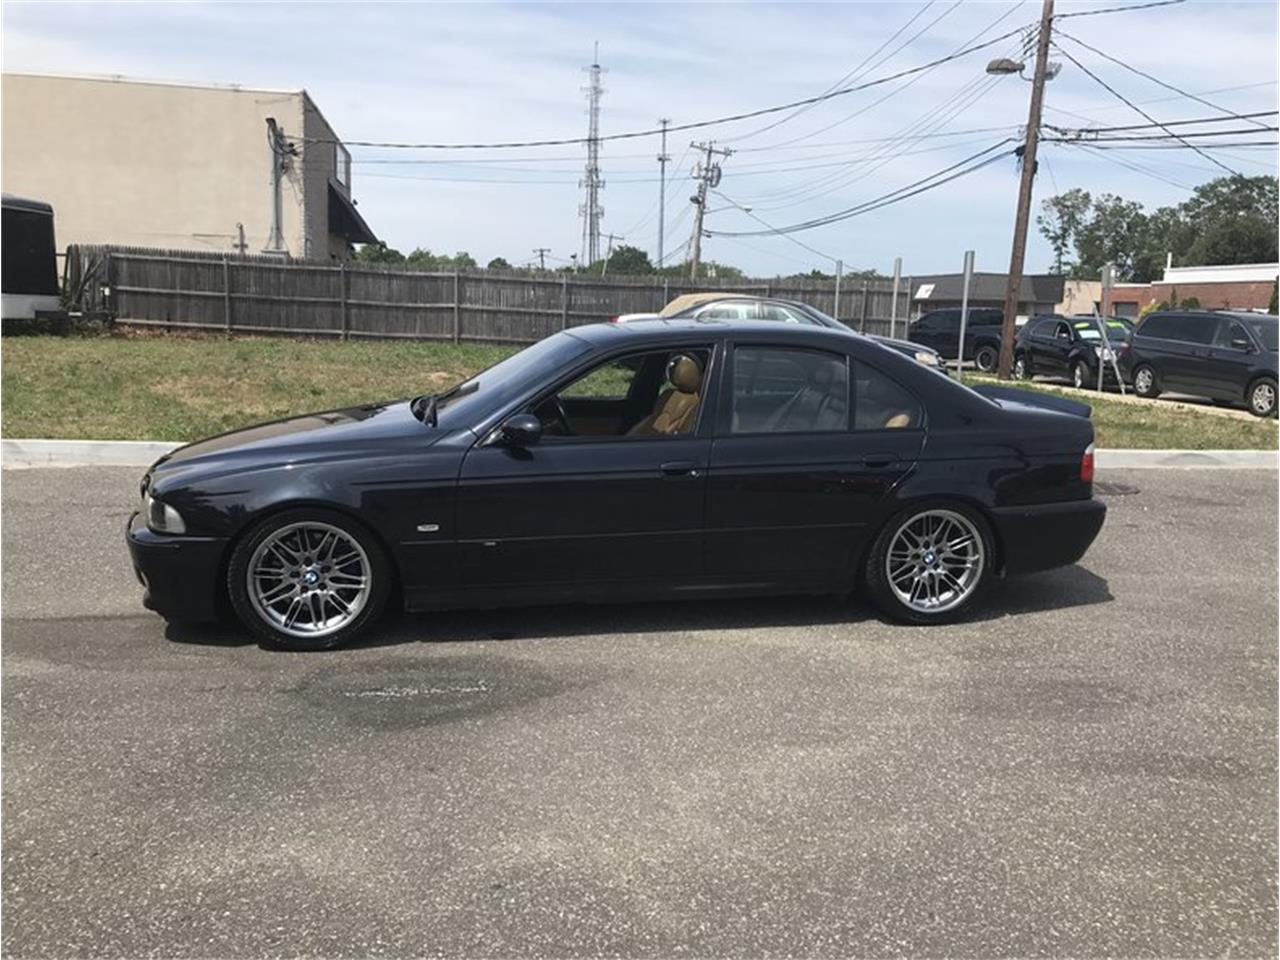 For Sale] 2003 BMW E39 M5  BMW M5 Forum and M6 Forums